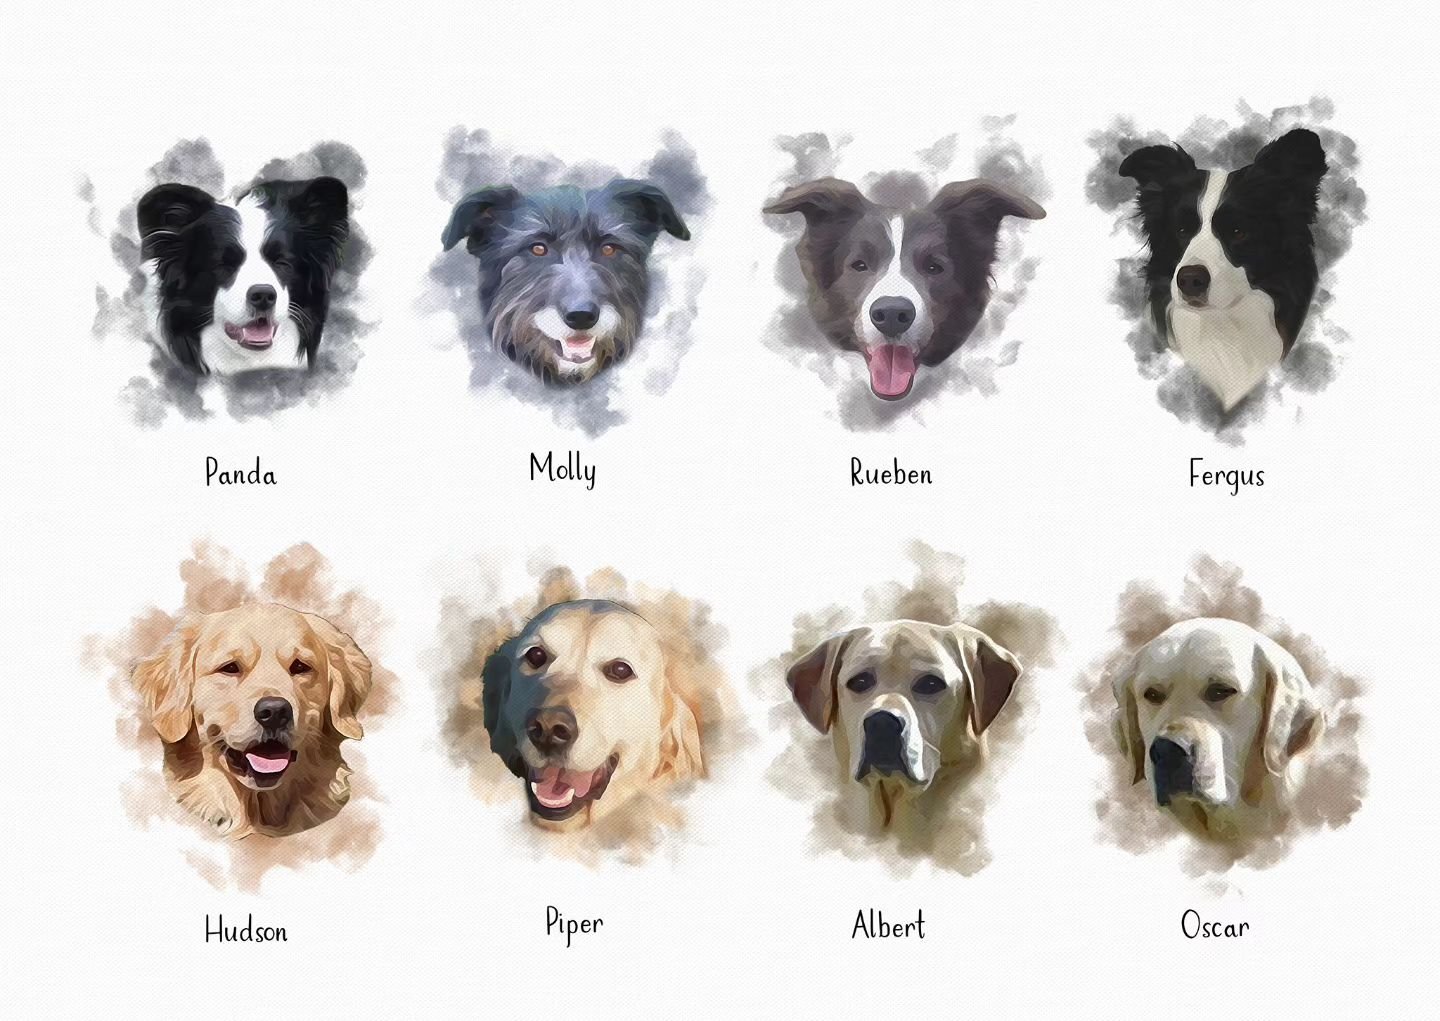 8️⃣ THE CUTEST 8 8️⃣

Our biggest portrait to date with EIGHT pups in one print 😱 This portrait has to be up there as the most fun portrait yet! It was a challenge but we're stoked with the outcome and she looks so good printed on our watercolour pa